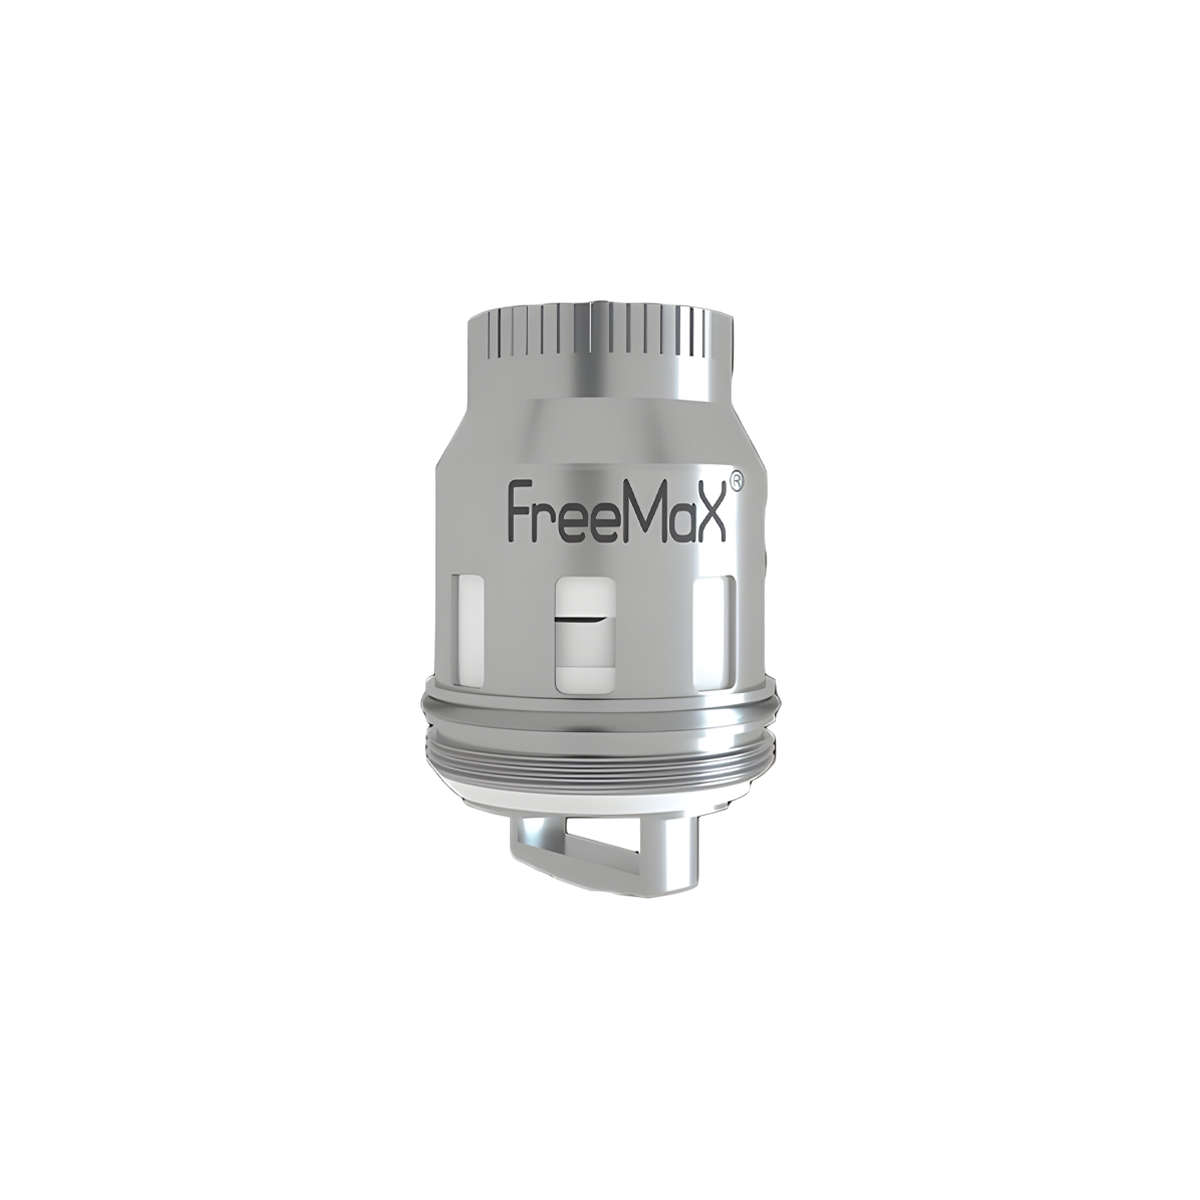 FreeMax Mesh Pro Replacement Coils Kanthal Quad Mesh Coil - 0.15 Ω  